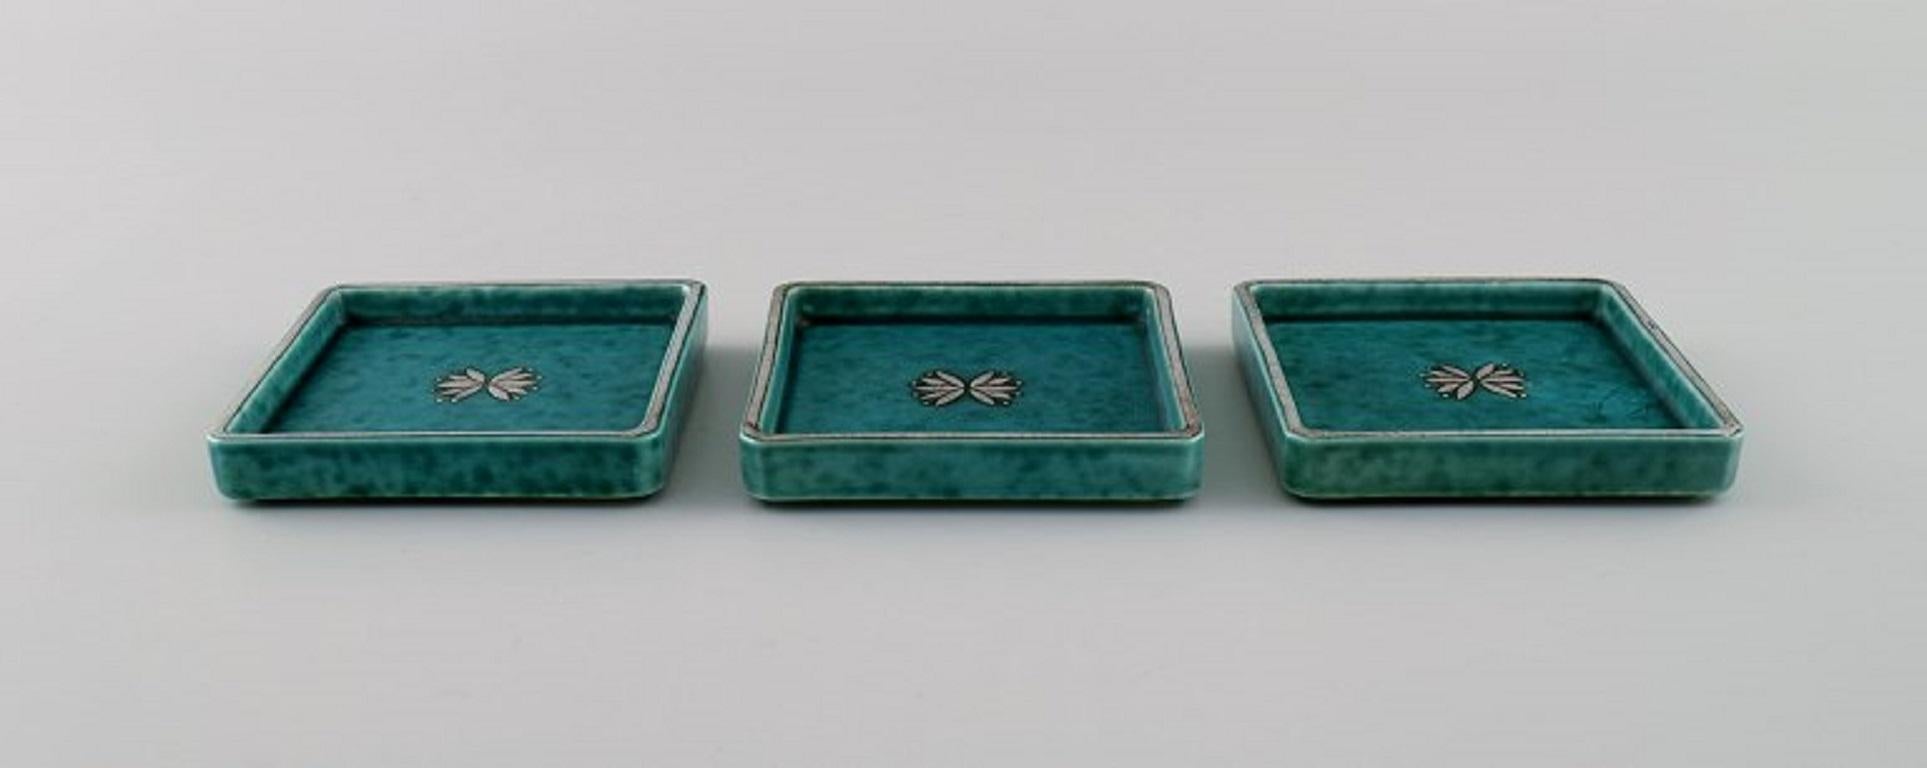 Wilhelm Kåge (1889-1960) for Gustavsberg. 
Three Argenta Art Deco dishes in glazed ceramics. 
Beautiful glaze in shades of green with silver inlay. 1940s.
Measures: 9 x 9 x 1.6 cm.
In excellent condition.
Stamped.